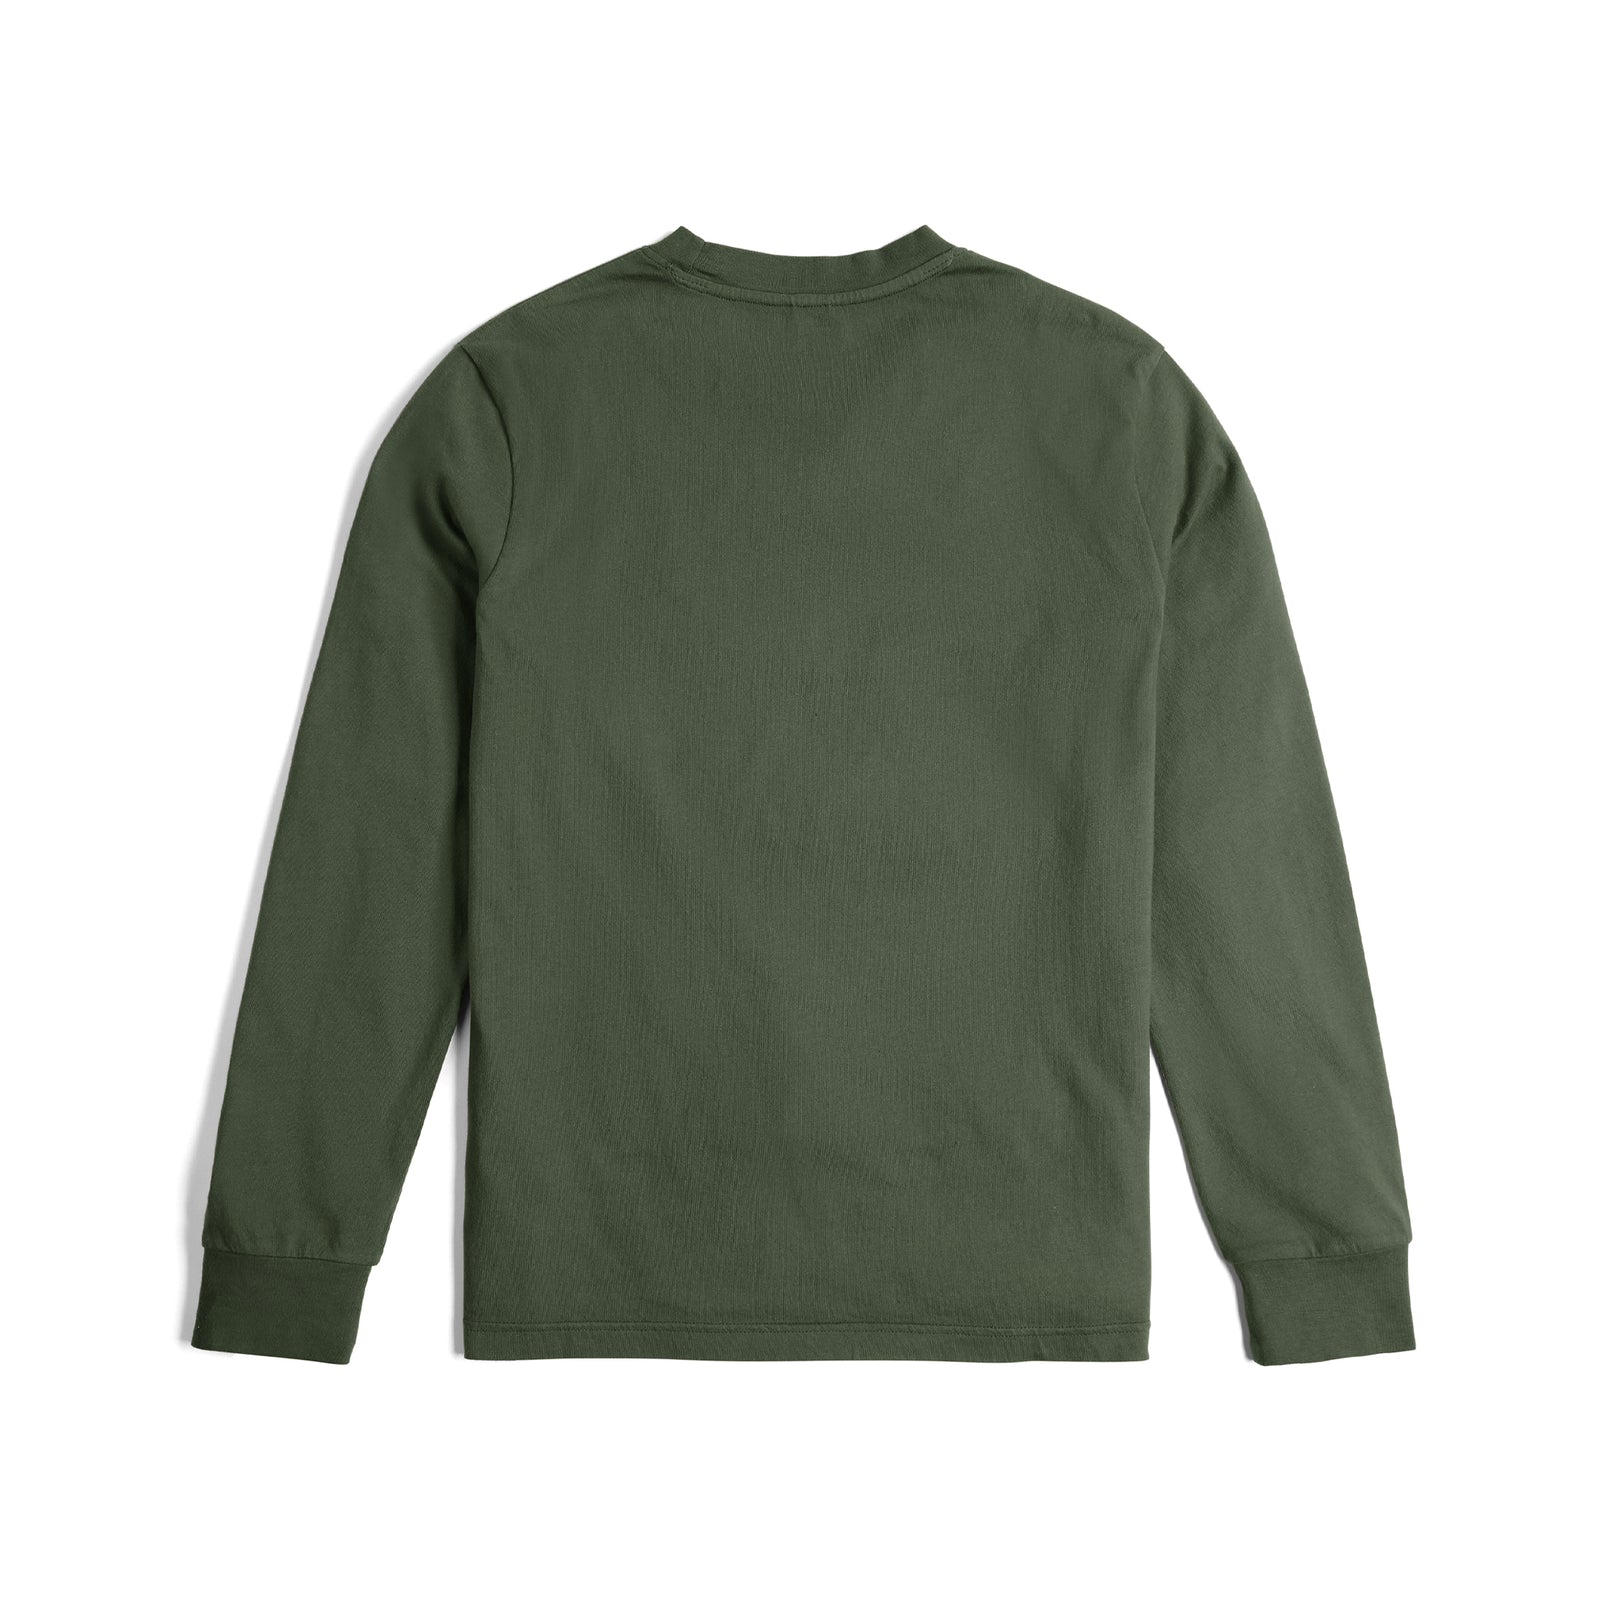 Dirt Pocket Tee L/S in "Olive"